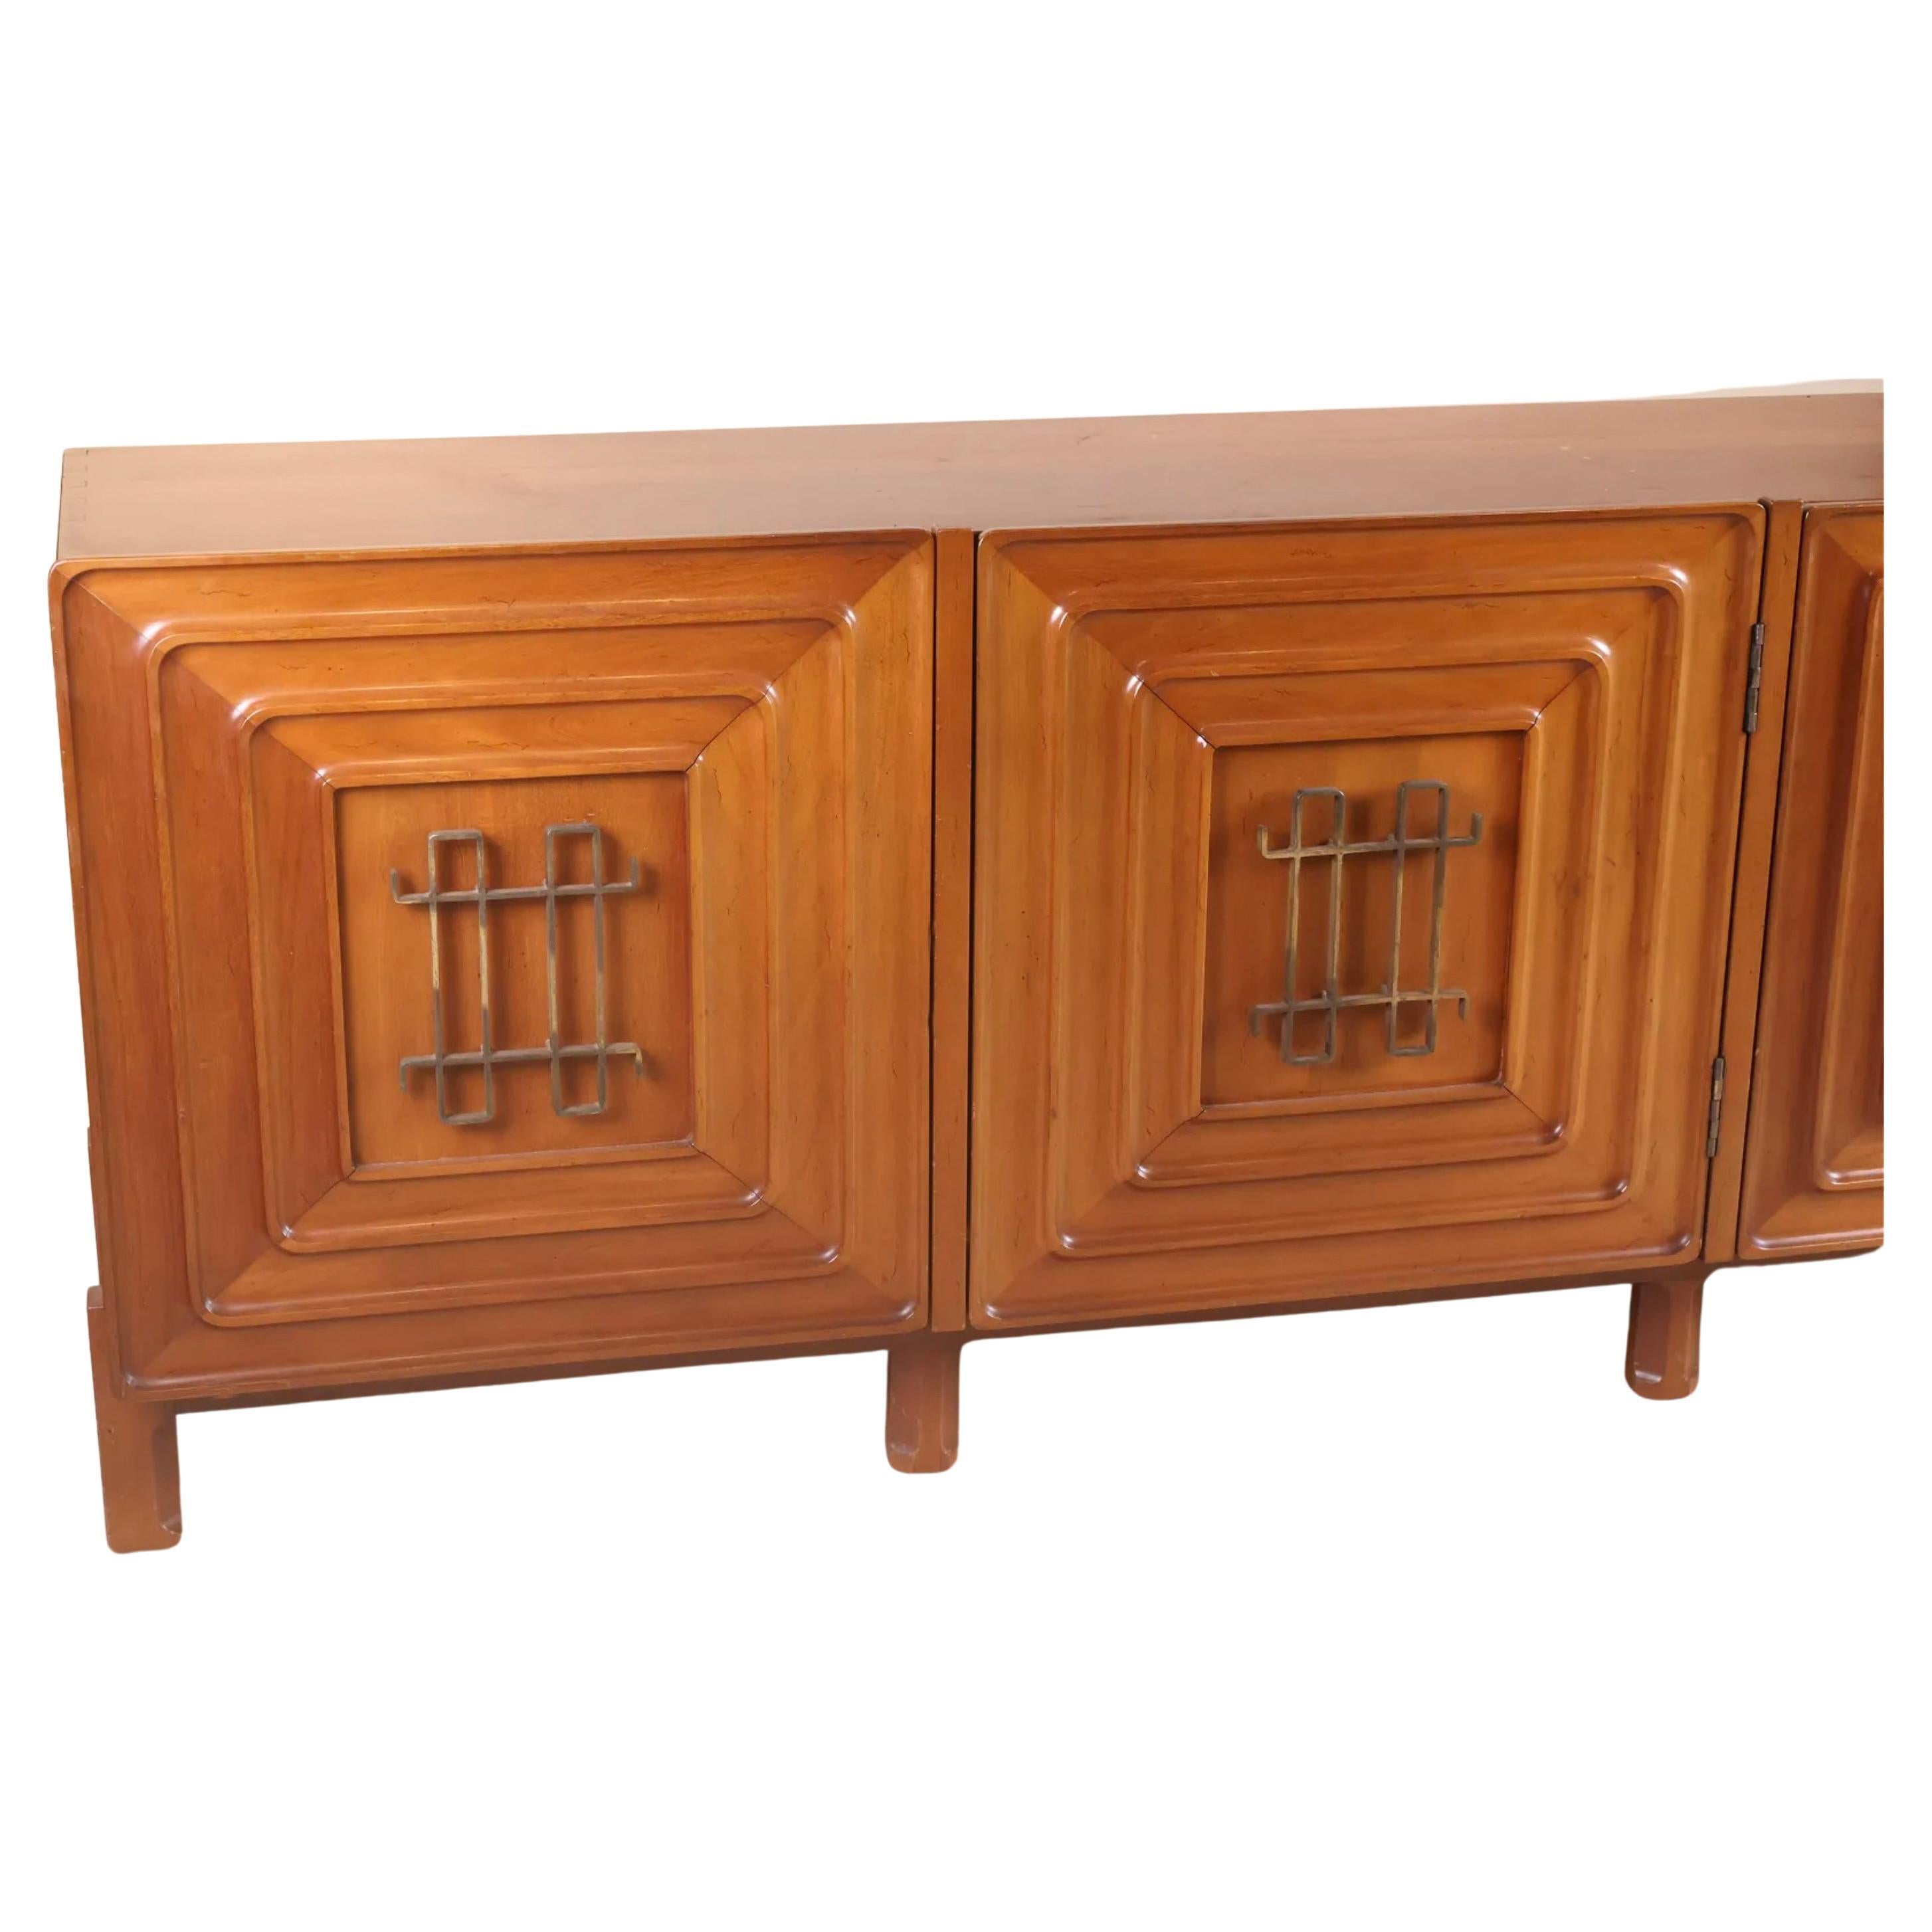 Mexican Exquisite Credenza by Edmond J. Spence made by Industria Mueblera Mexico For Sale